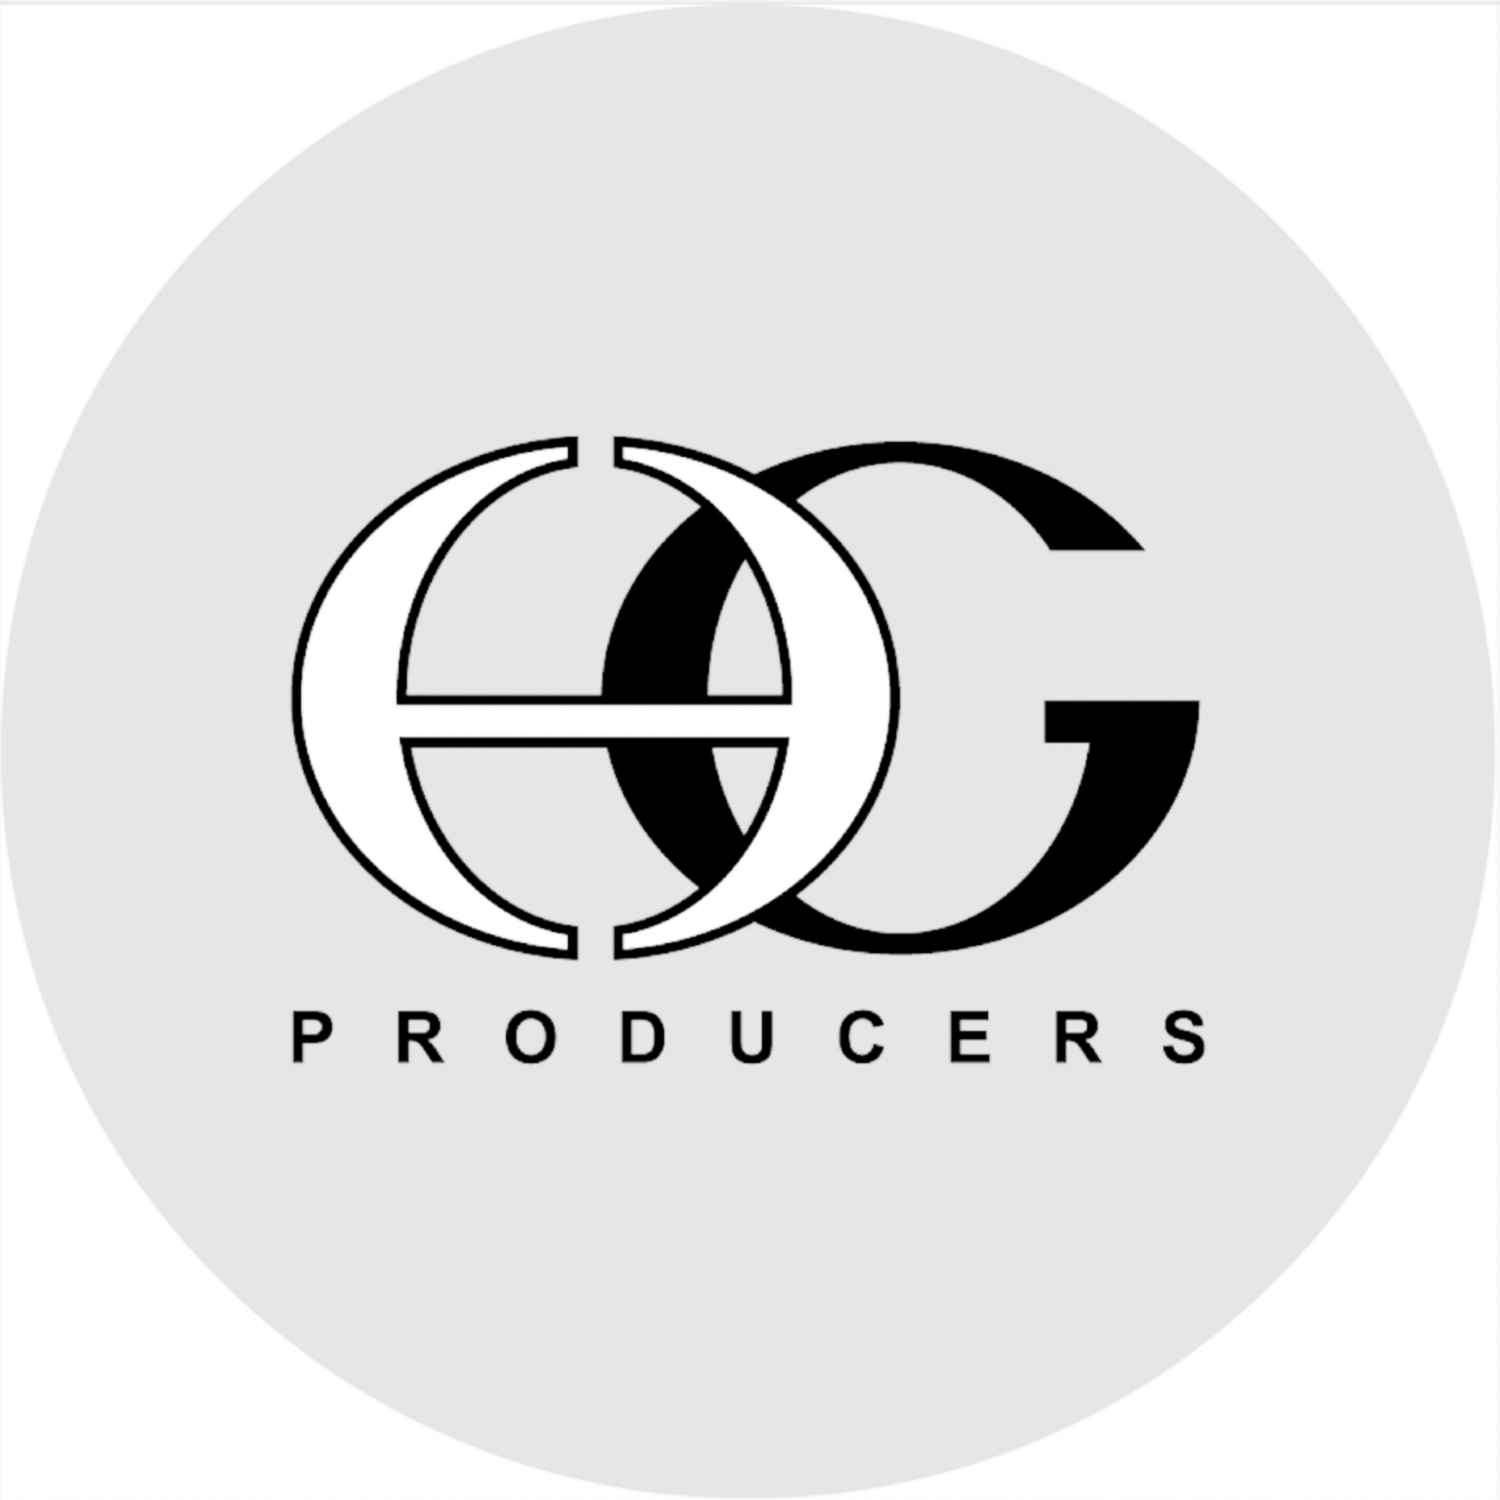 HG Producers